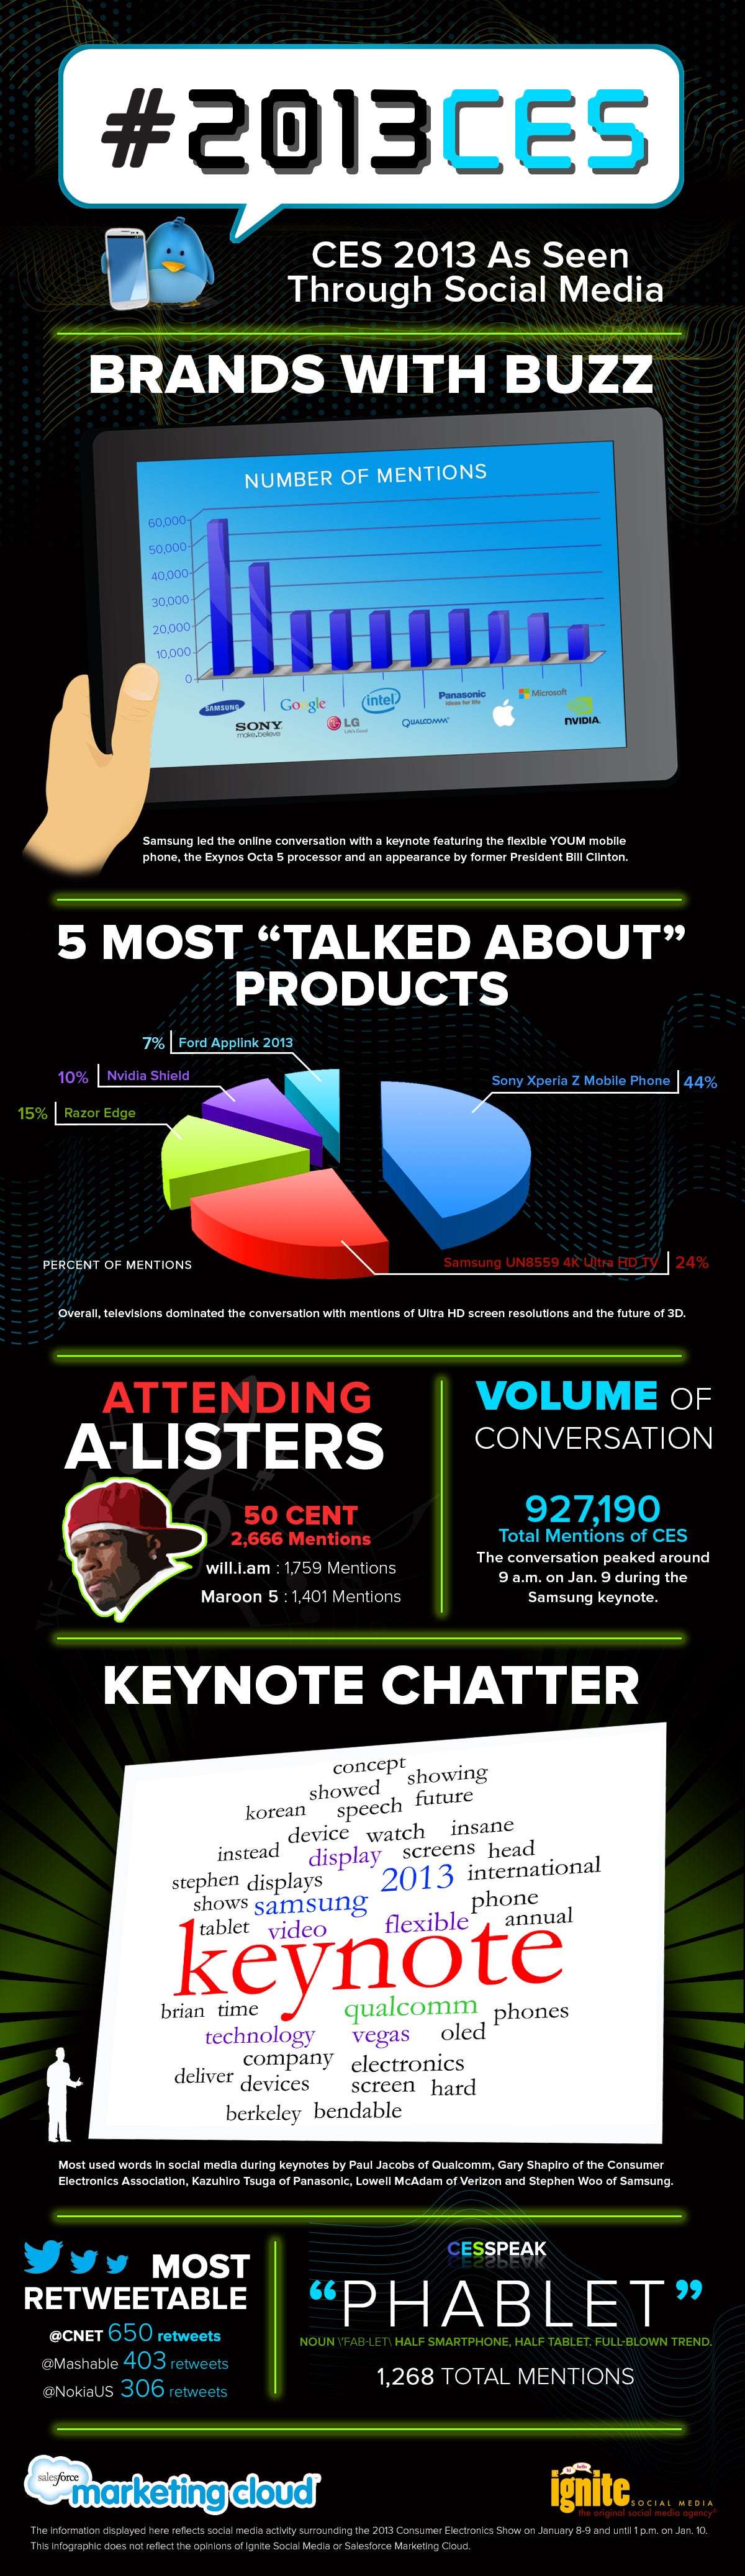 Infographic: Sony Xperia Z the most talked about product, Samsung the most talked about mfr at CES